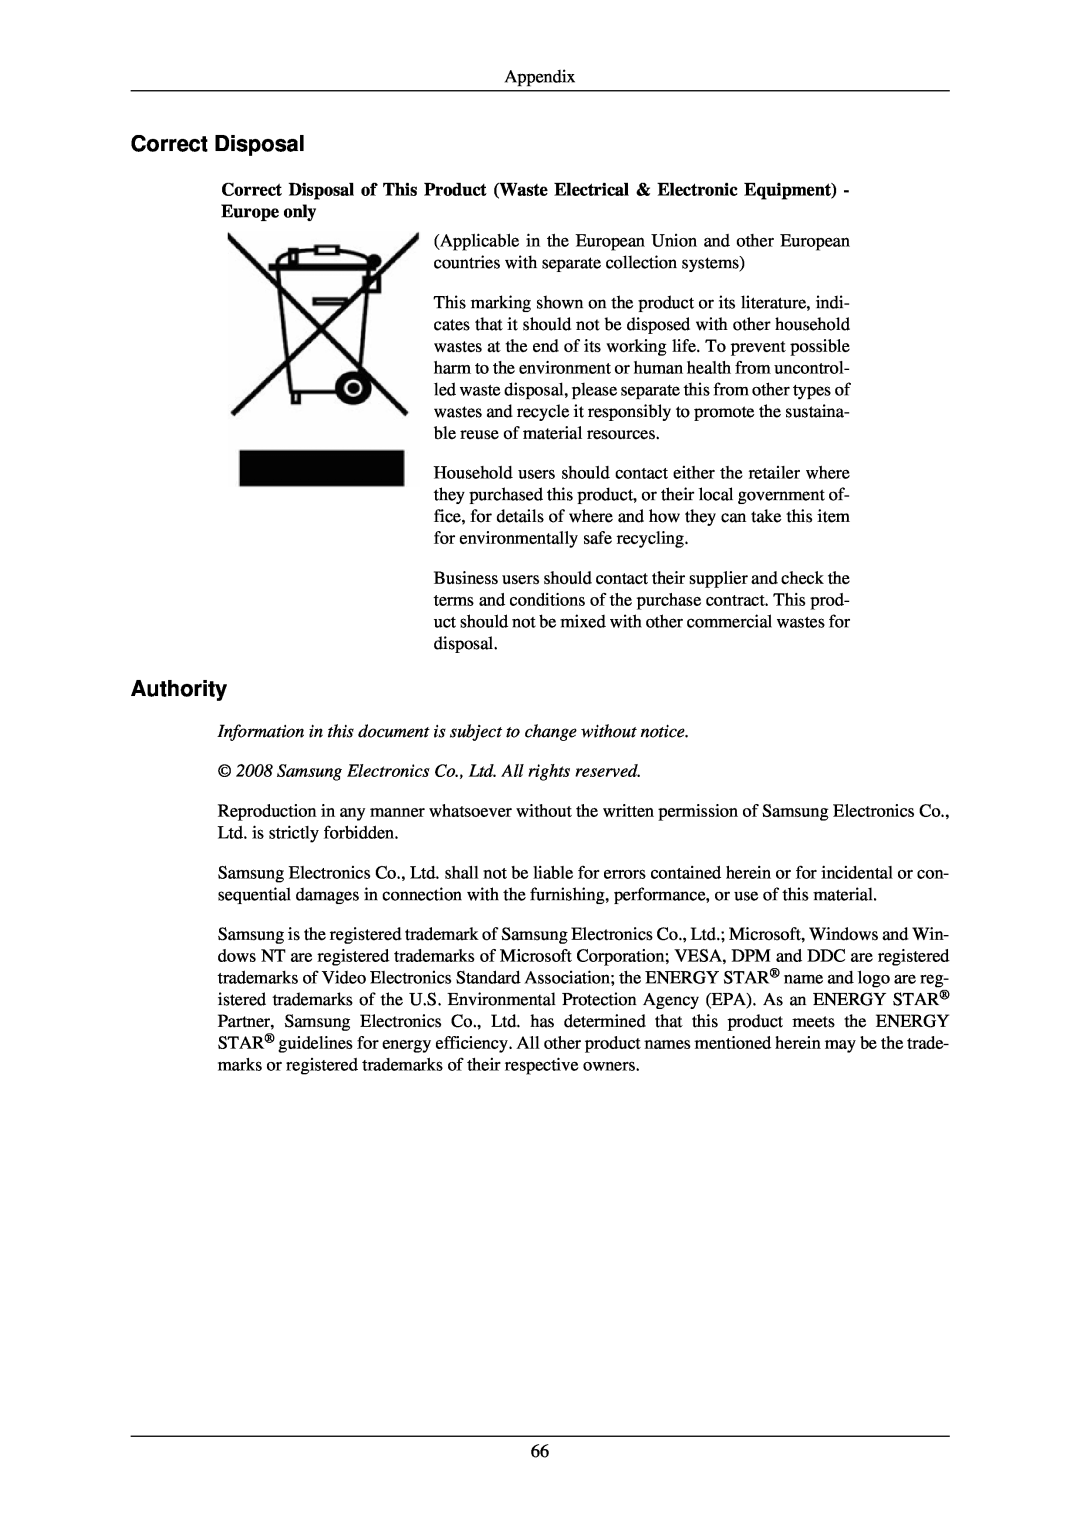 Samsung 2243NWX user manual Correct Disposal, Authority, Information in this document is subject to change without notice 